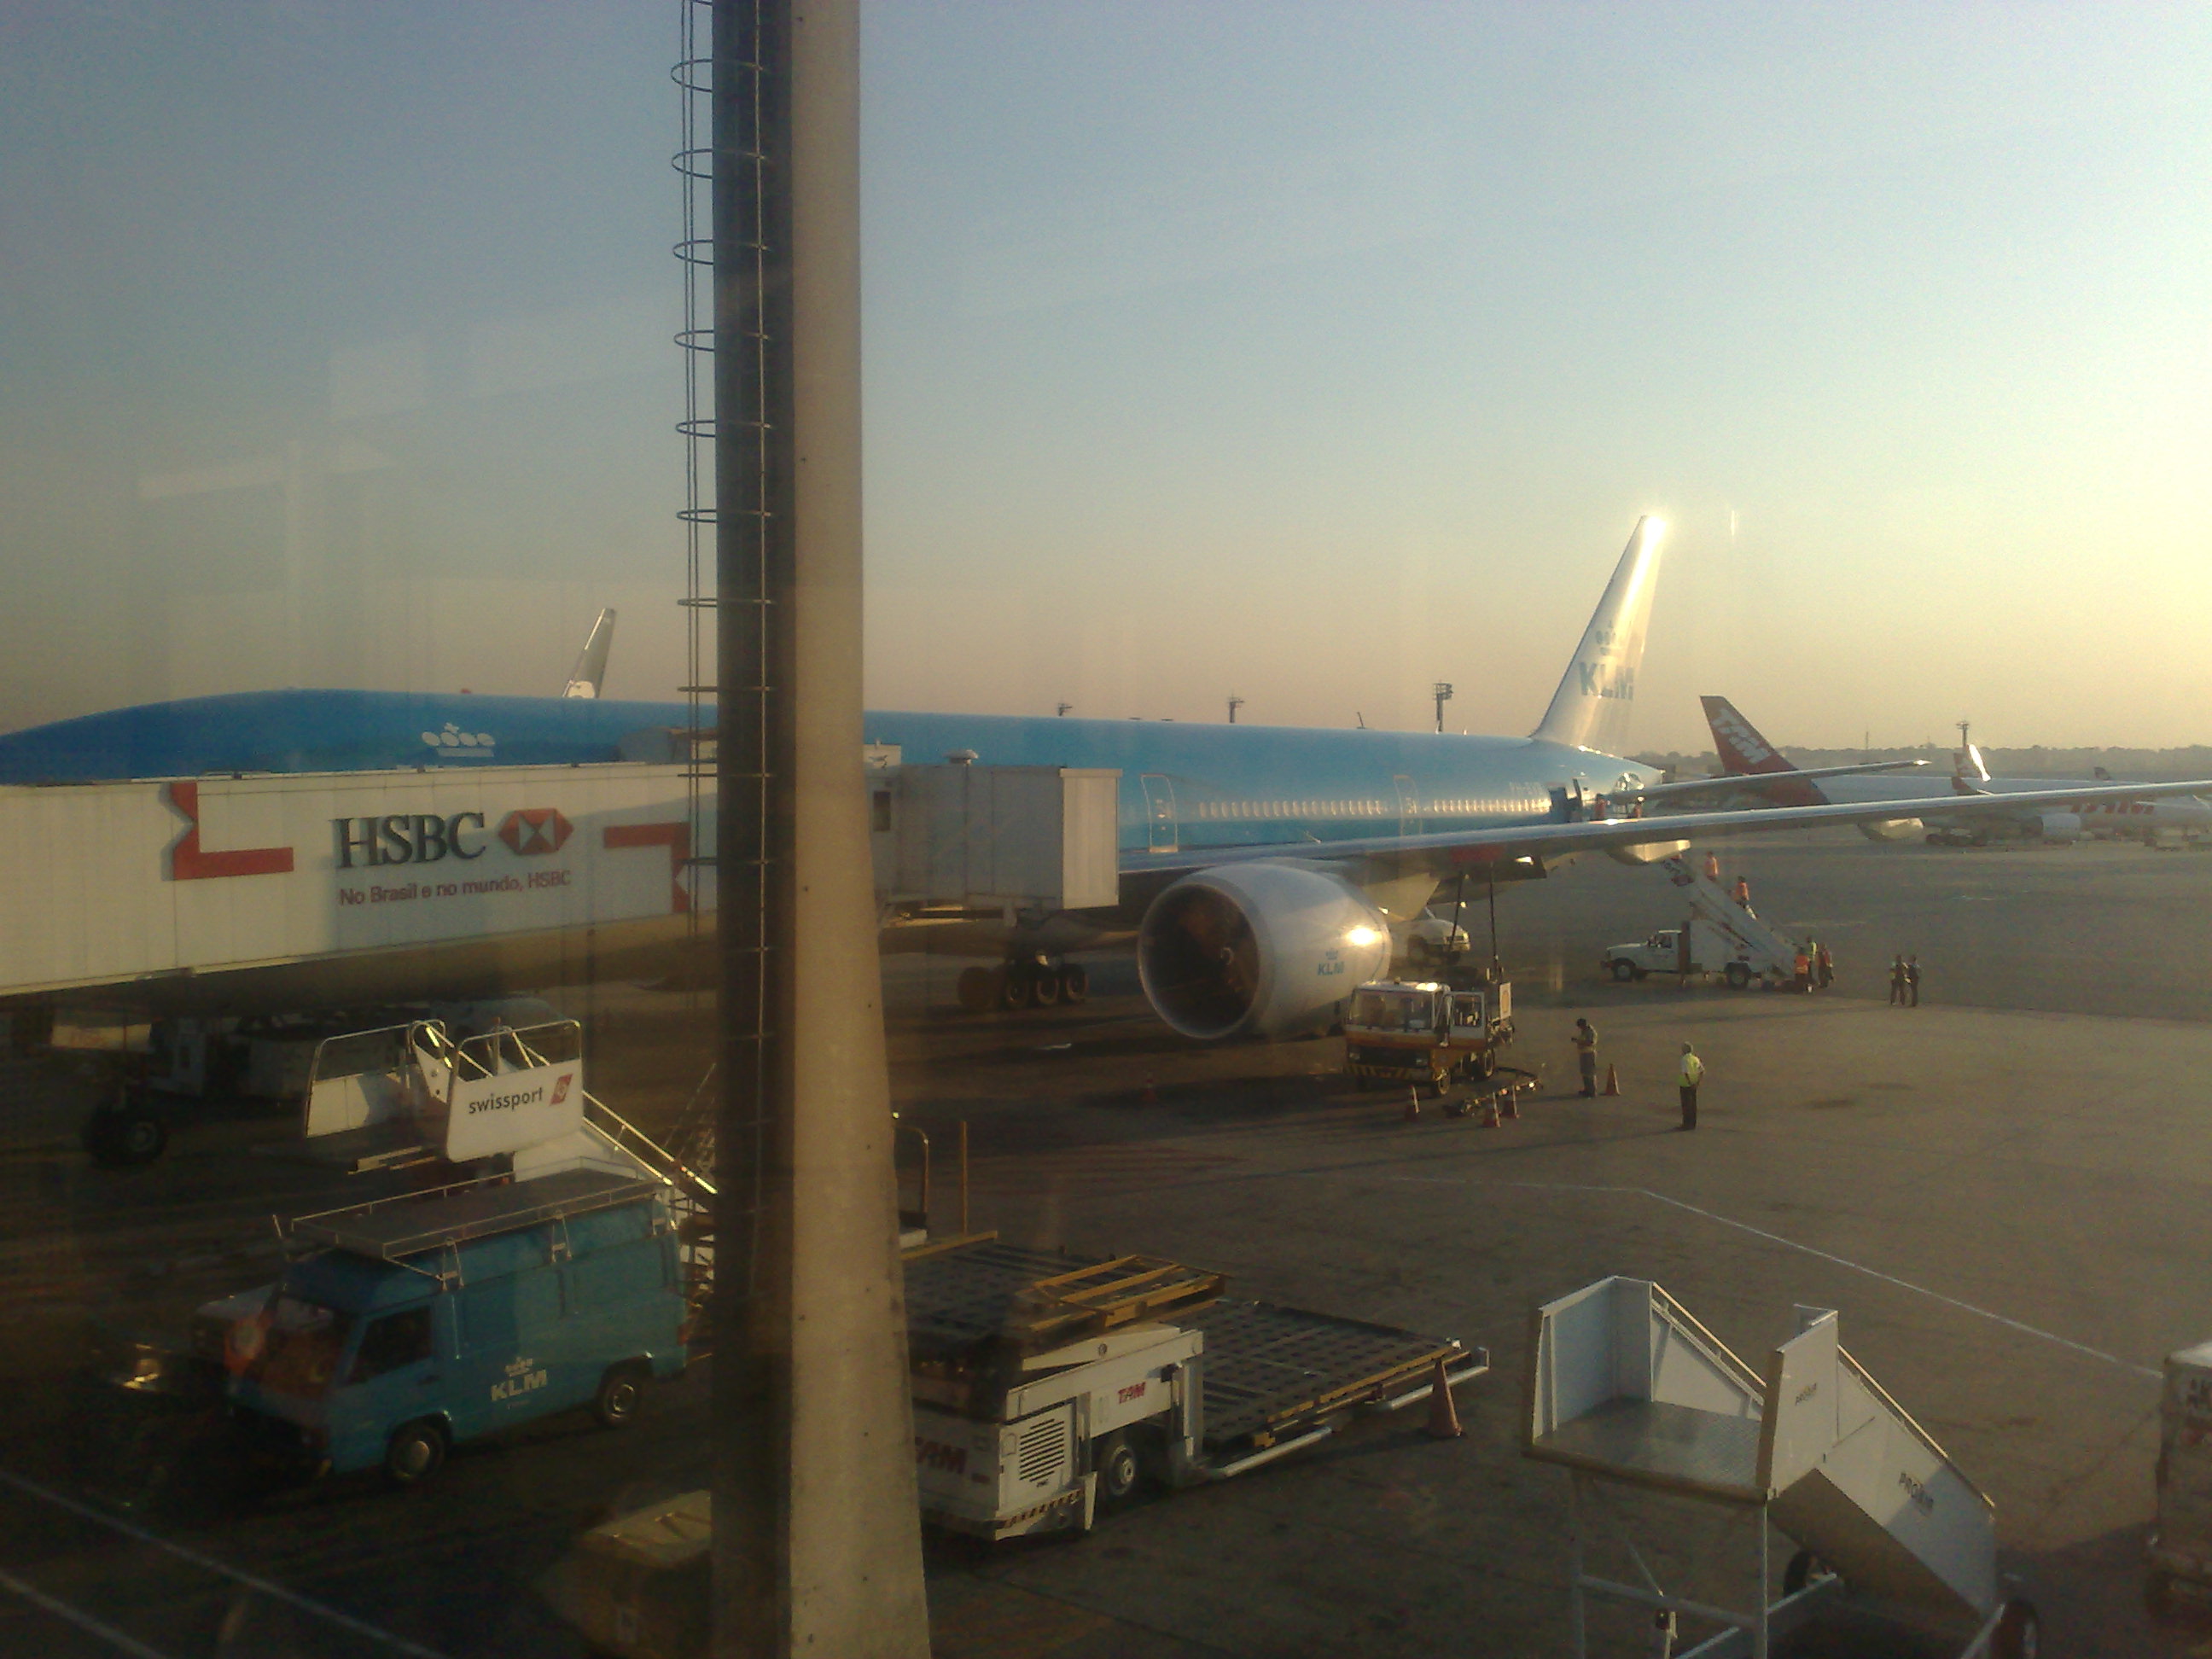 29/08/2011 - 16:49 (Brazilian time) - Getting off the plane at Sao Paulo Airport